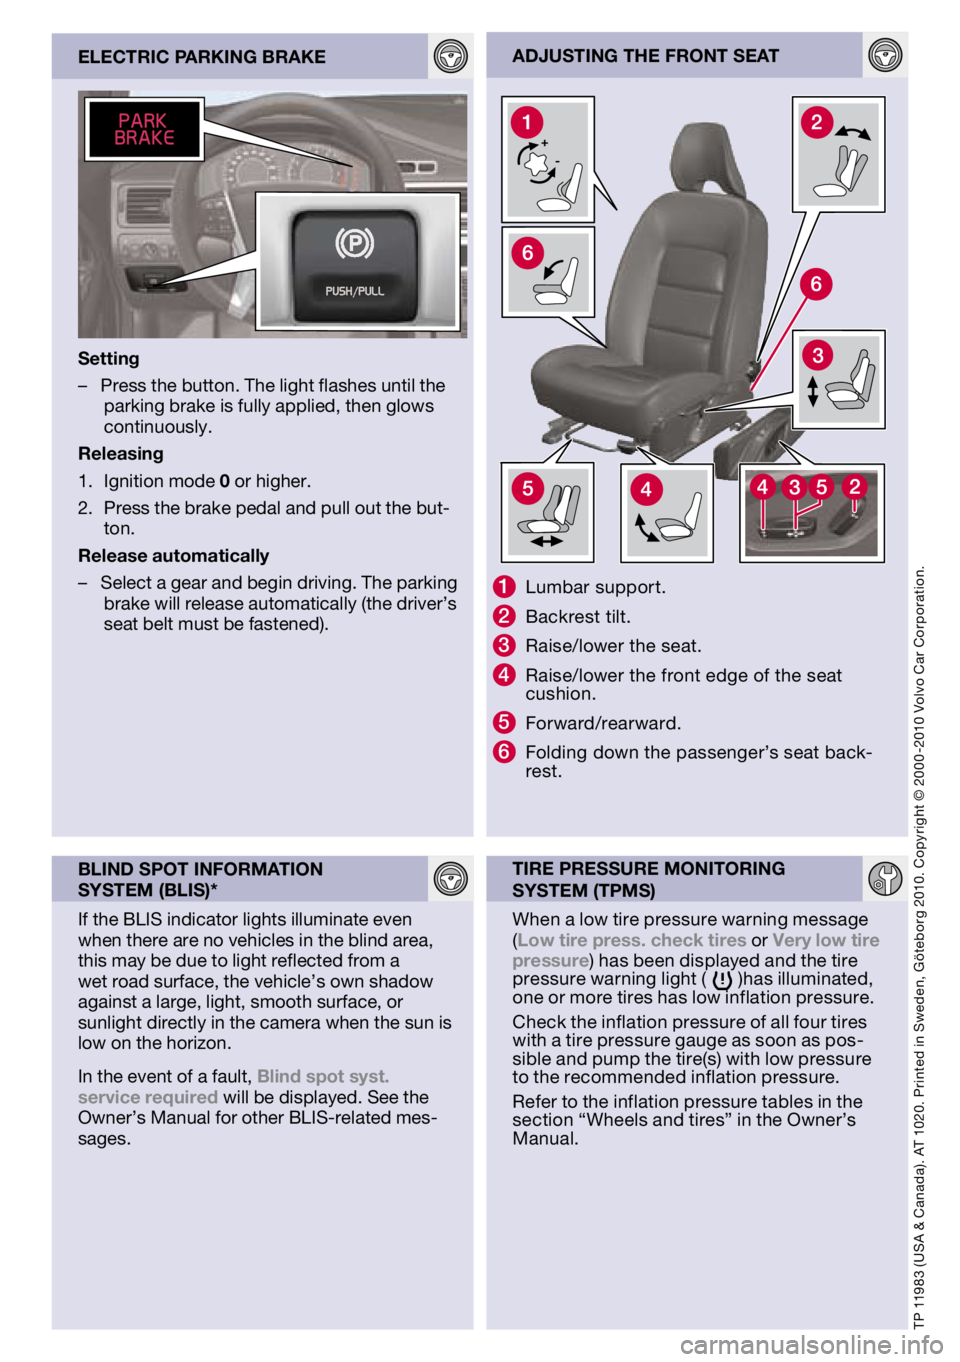 VOLVO S80 2011  Quick Guide 
adjusTIng	THE	fROnT	sEaT
1	Lumbar support.
2	Backrest tilt.
3	Raise/lower the seat.
4	Raise/lower the front edge of the seat cushion.
5	Forward/rearward.
6	Folding down the passenger’s seat back-re